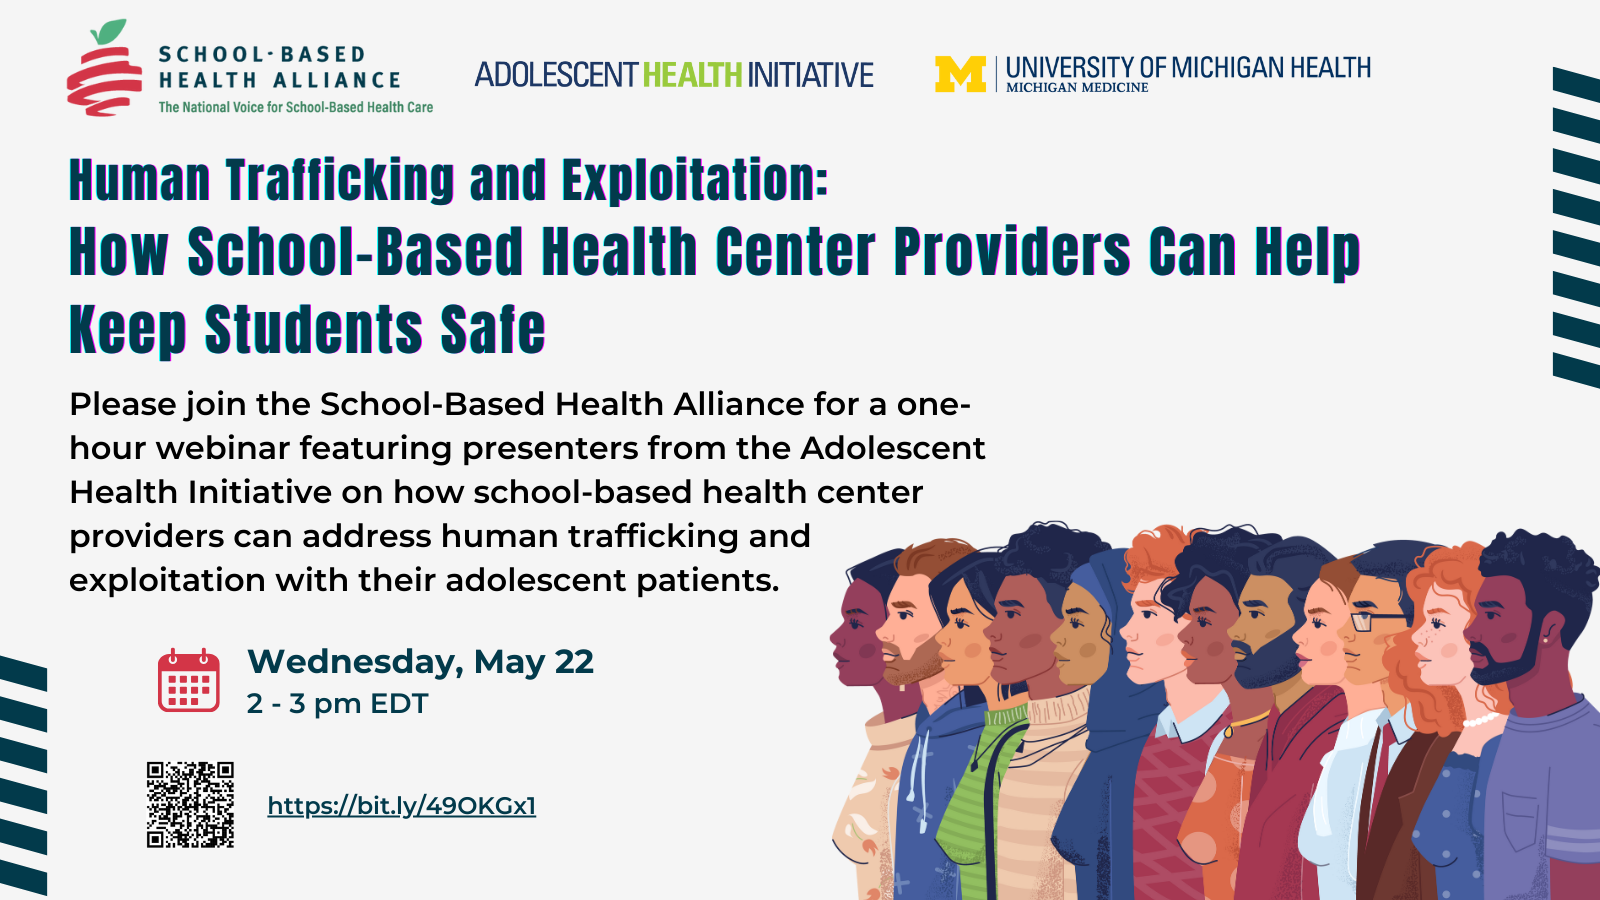 Human Trafficking and Exploitation: How School-Based Health Center Providers Can Help Keep Students Safe